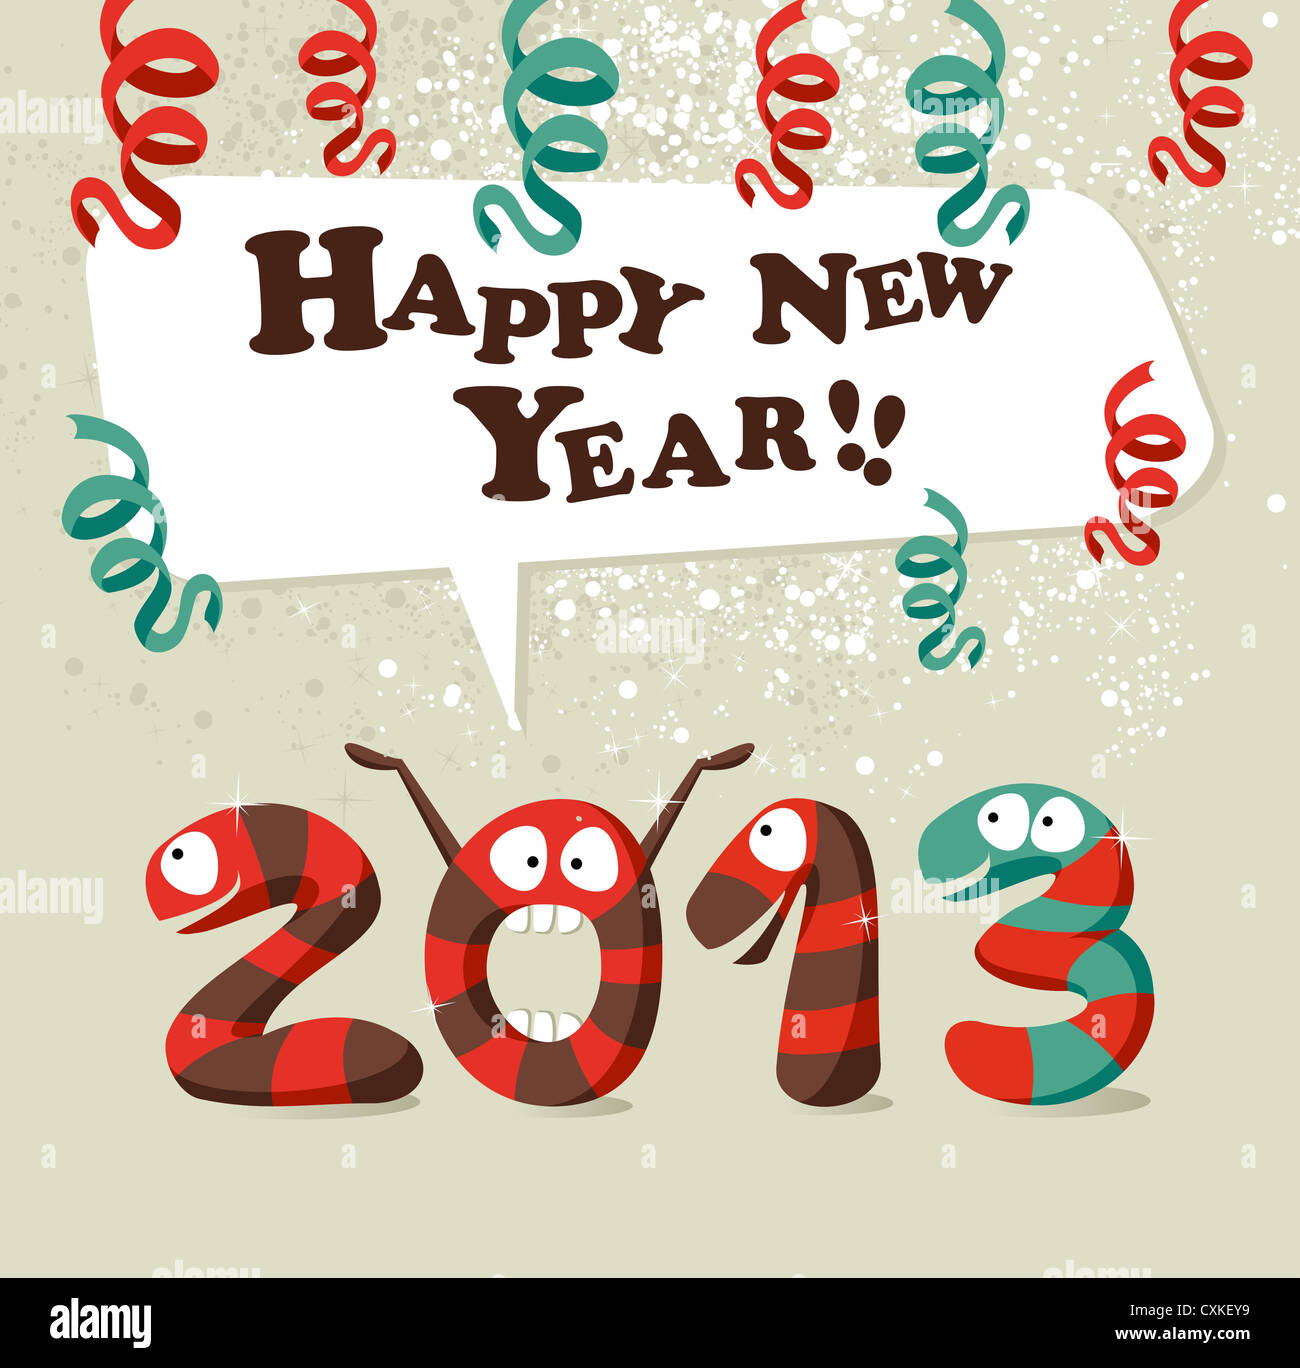 Funny cartoon snake celebrating the beginning of 2013 new year background. Vector illustration layered for easy manipulation and custom coloring. Stock Photo